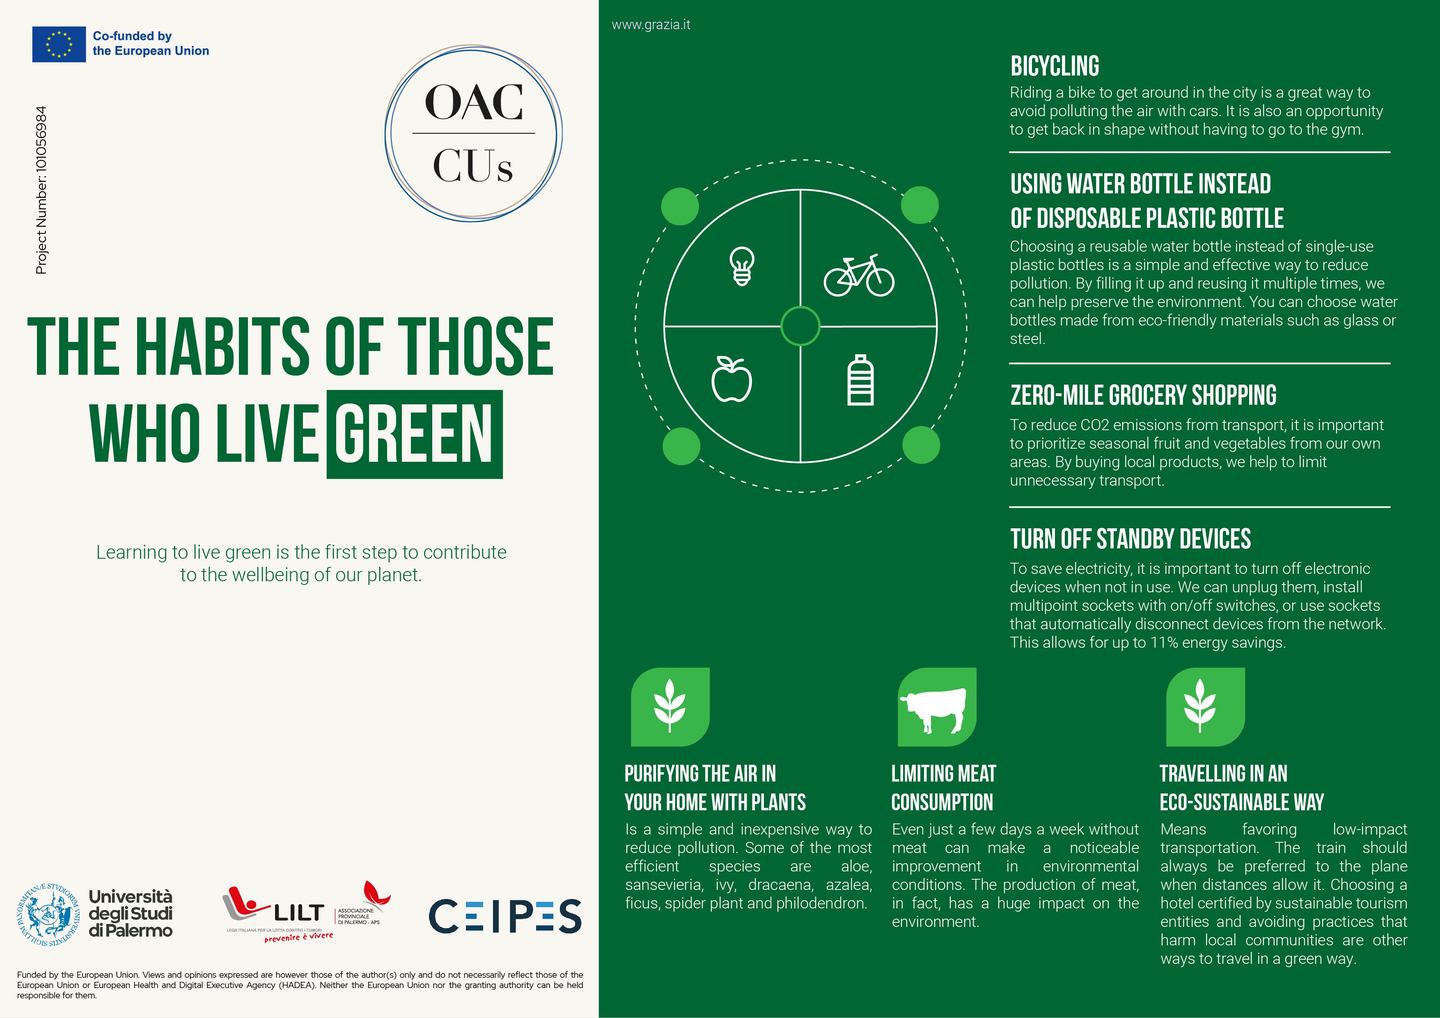 The habits of those who live green